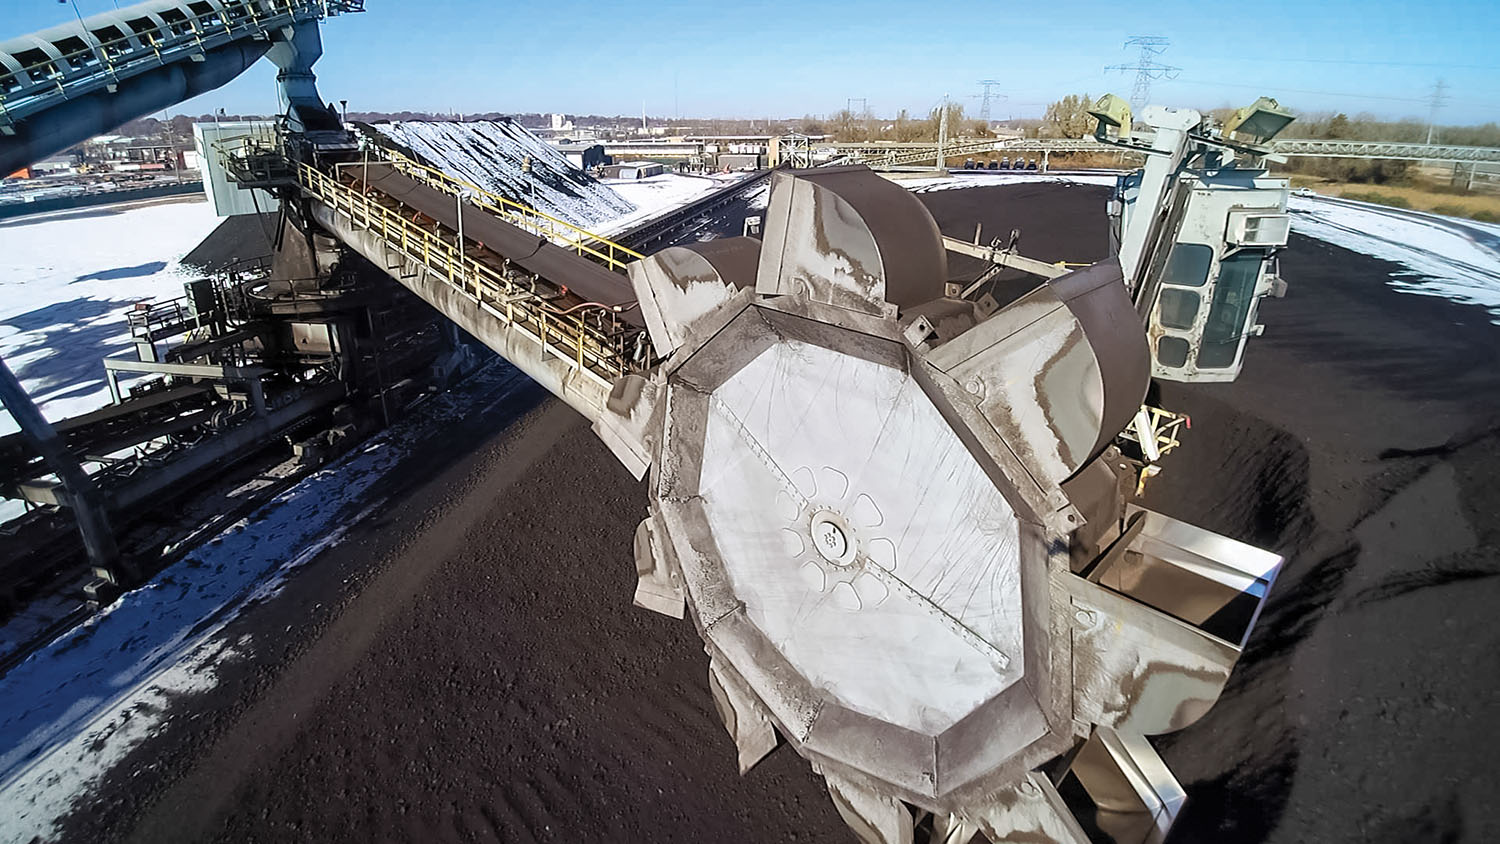 Rotating bucket heads load coal at ACBL’s Western Terminal in St. Louis, which has reopened and hopes to expand. (Photo courtesy of ACBL)